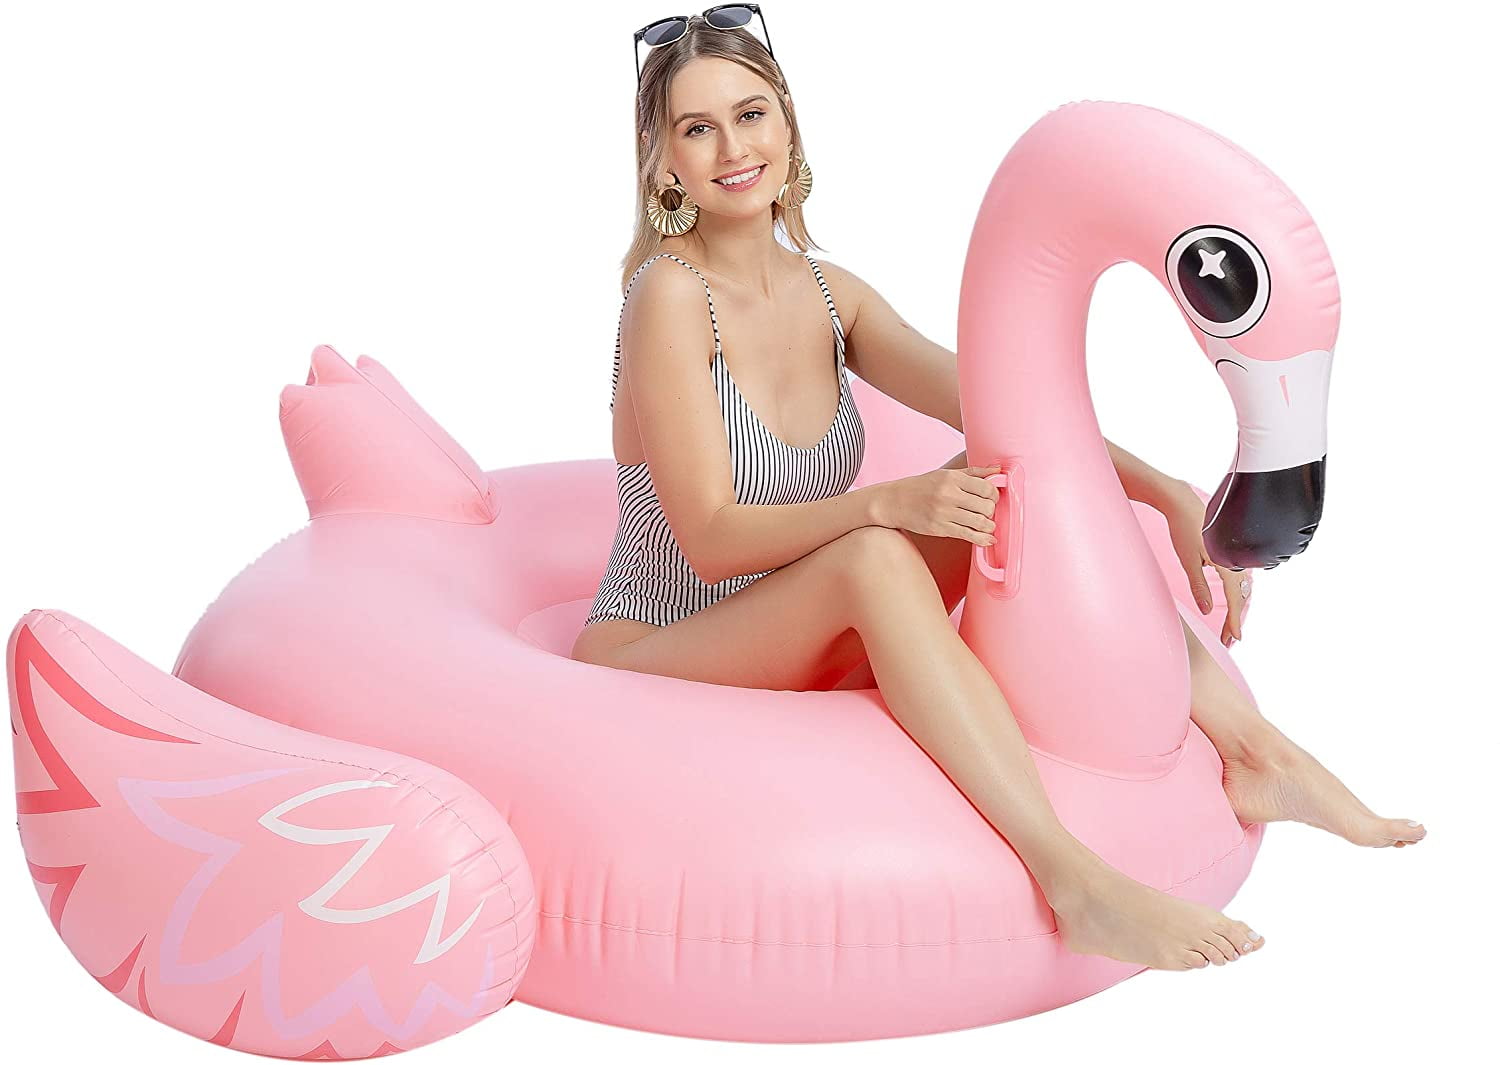 Giant Flamingo Party Floating Tube Pool Party ADULT SIZE Over 4 Feet Family Fun 